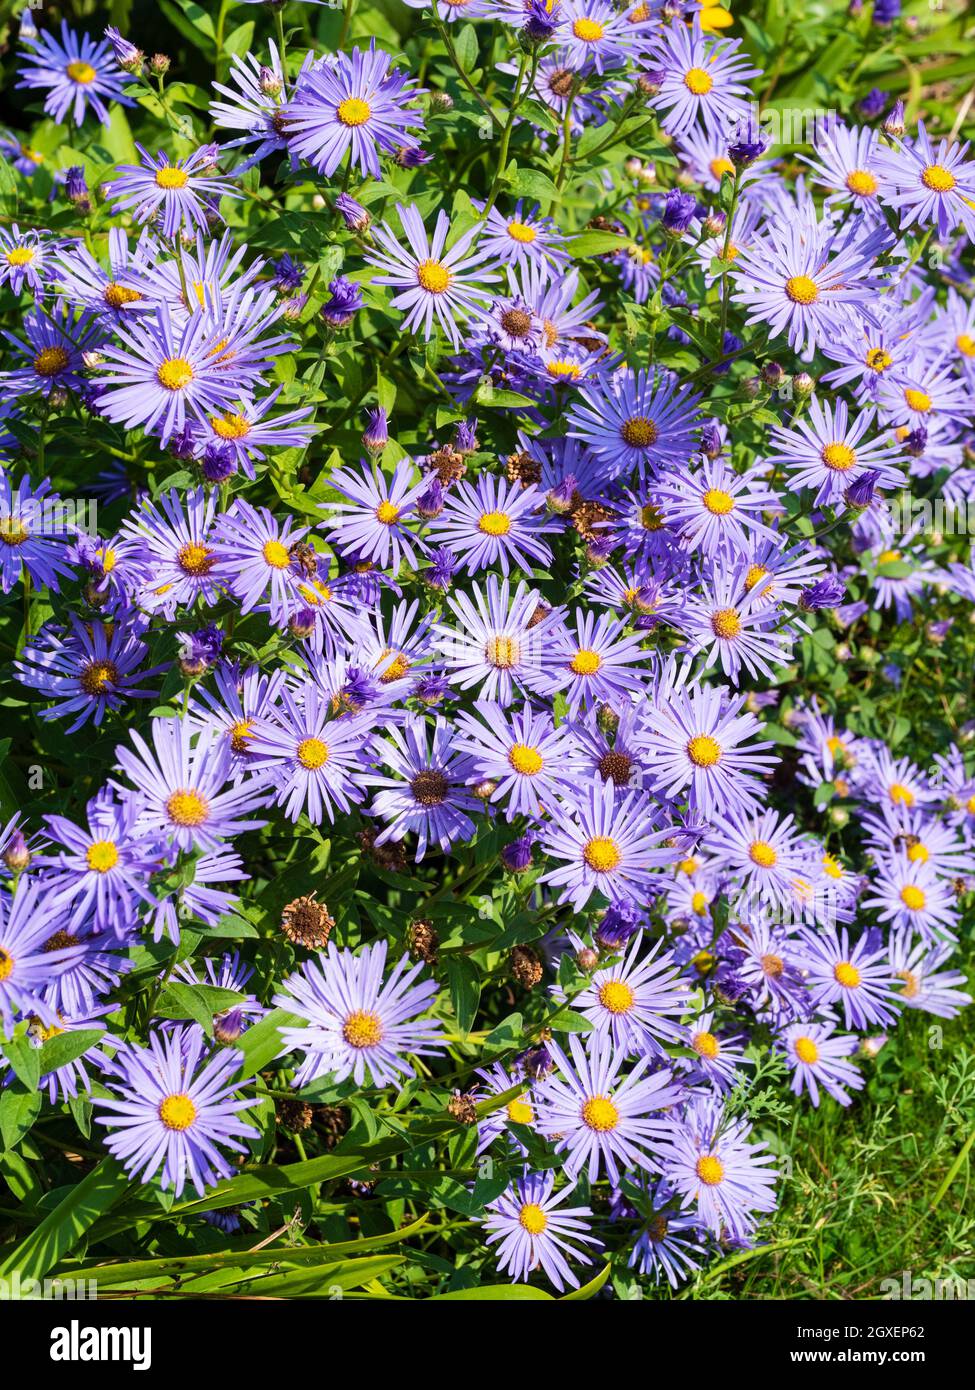 Massed blue daisies of the summer to autumn flowering hardy perennial, Aster frikartii 'Monch' Stock Photo